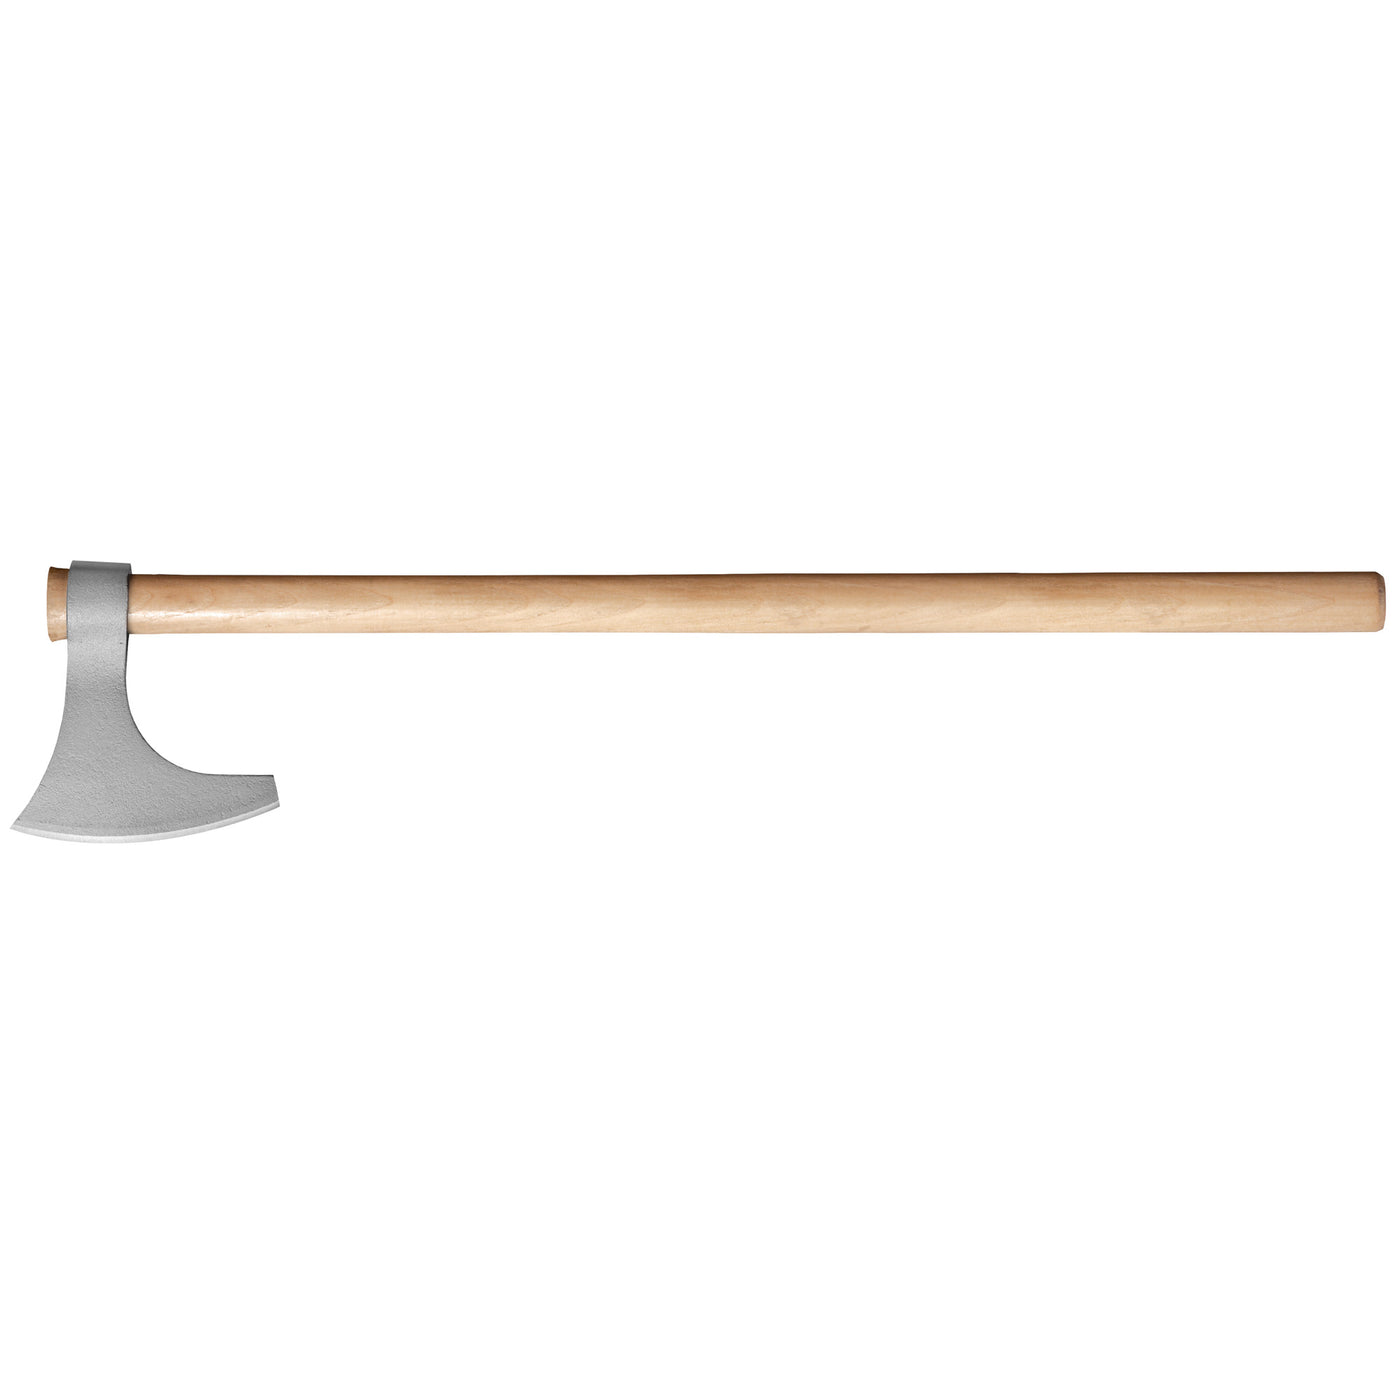 Cold Steel Viking Hand Axe 6.25 in Head 30 in Overall Length